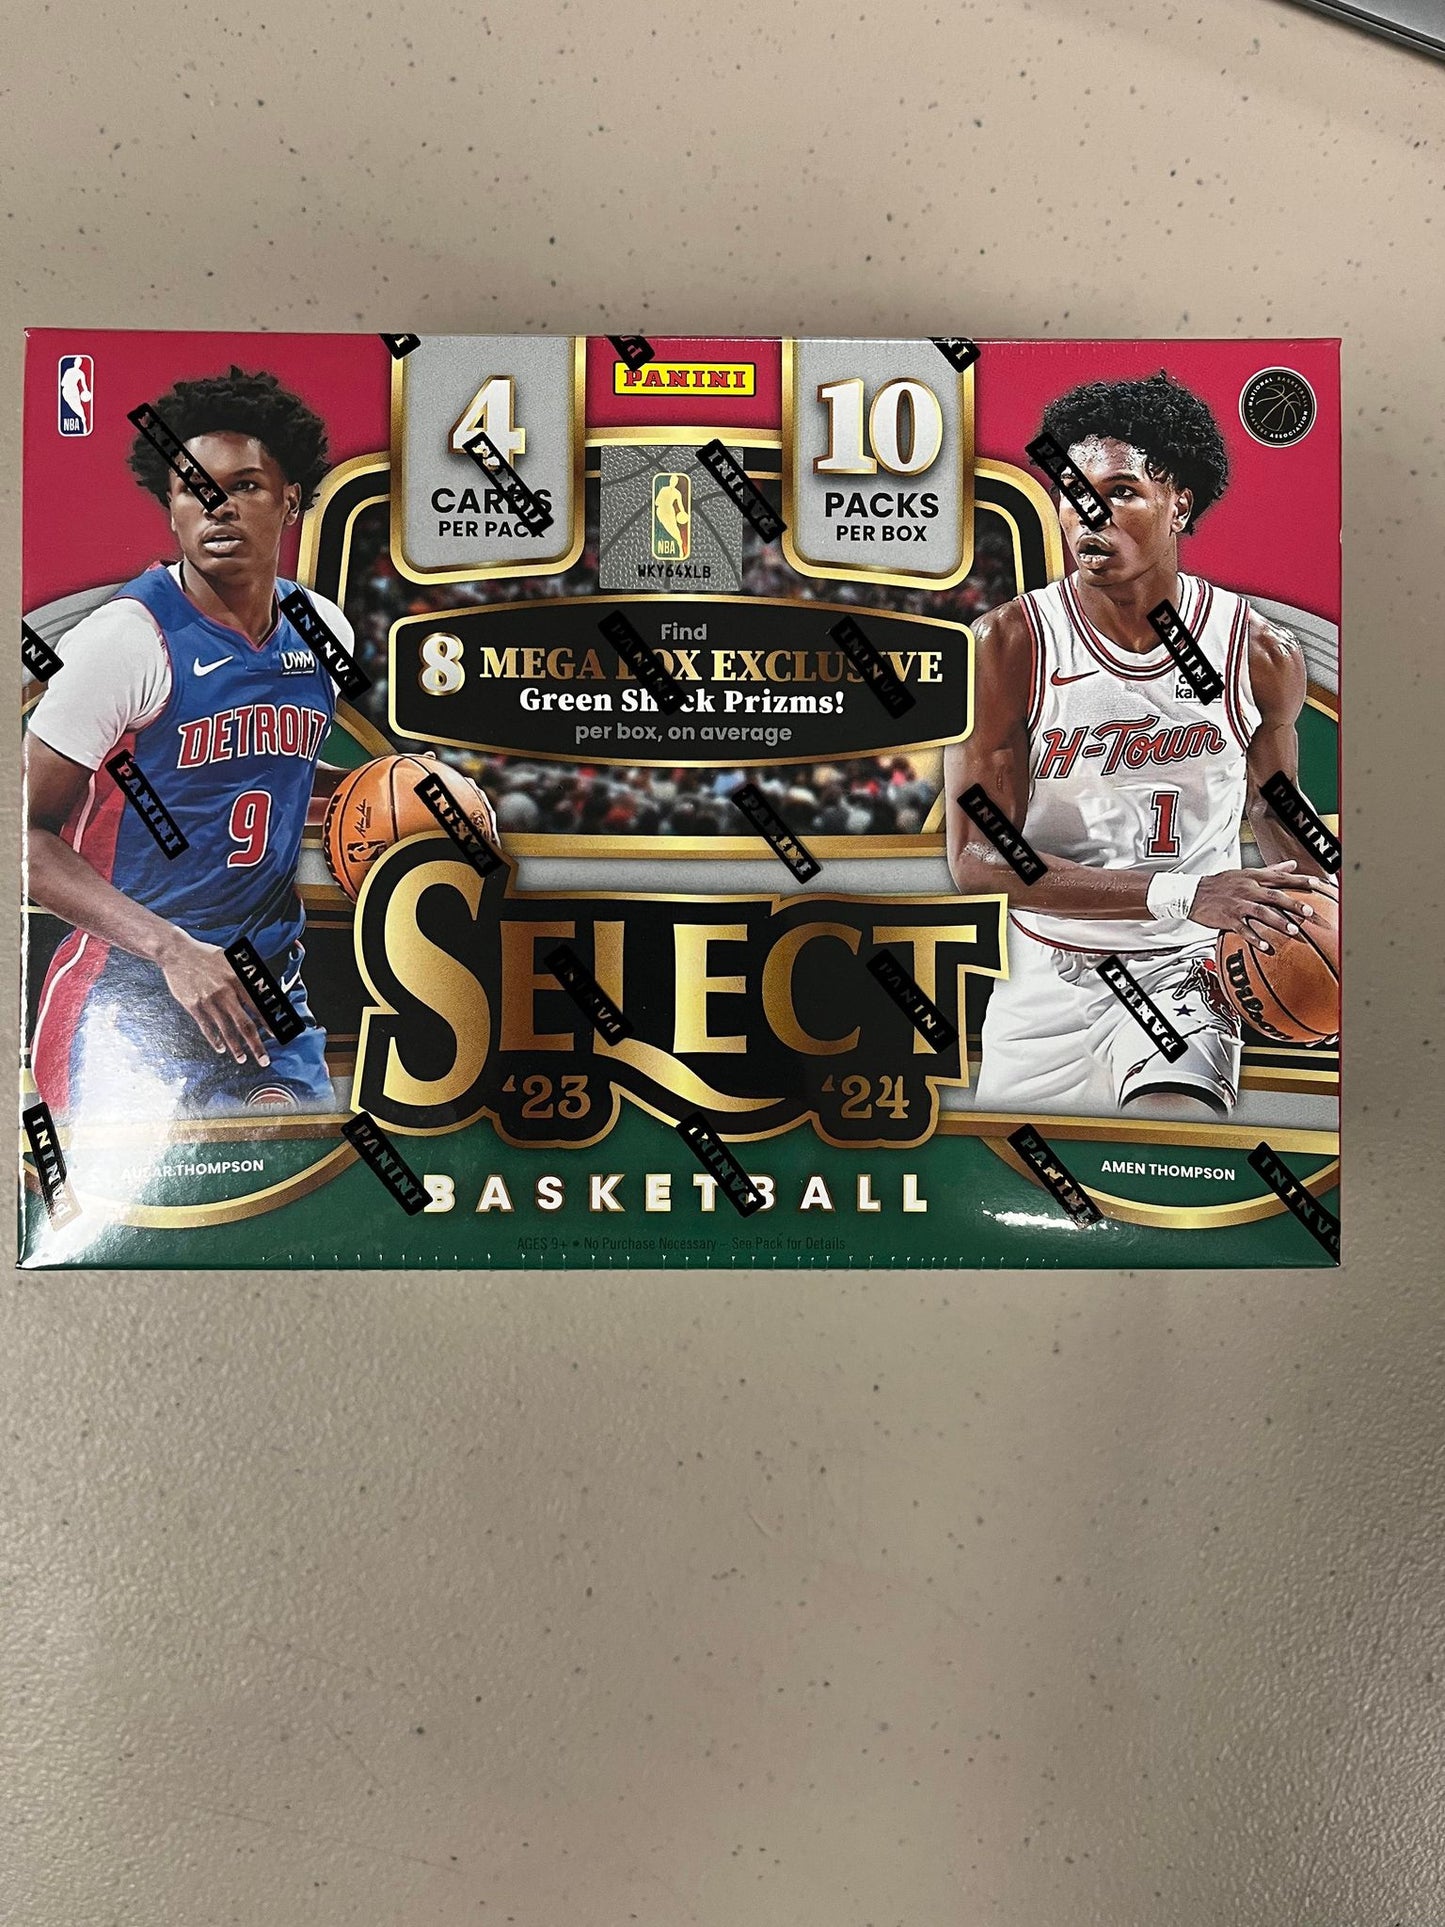 Experience the thrill of the game with the 2023-24 Panini Select Basketball Hobby Mega Box! This exclusive box features top players and rookies from the upcoming season. Get ready to collect and trade cards with friends or display them in style. Elevate your basketball collection with Panini Select today!